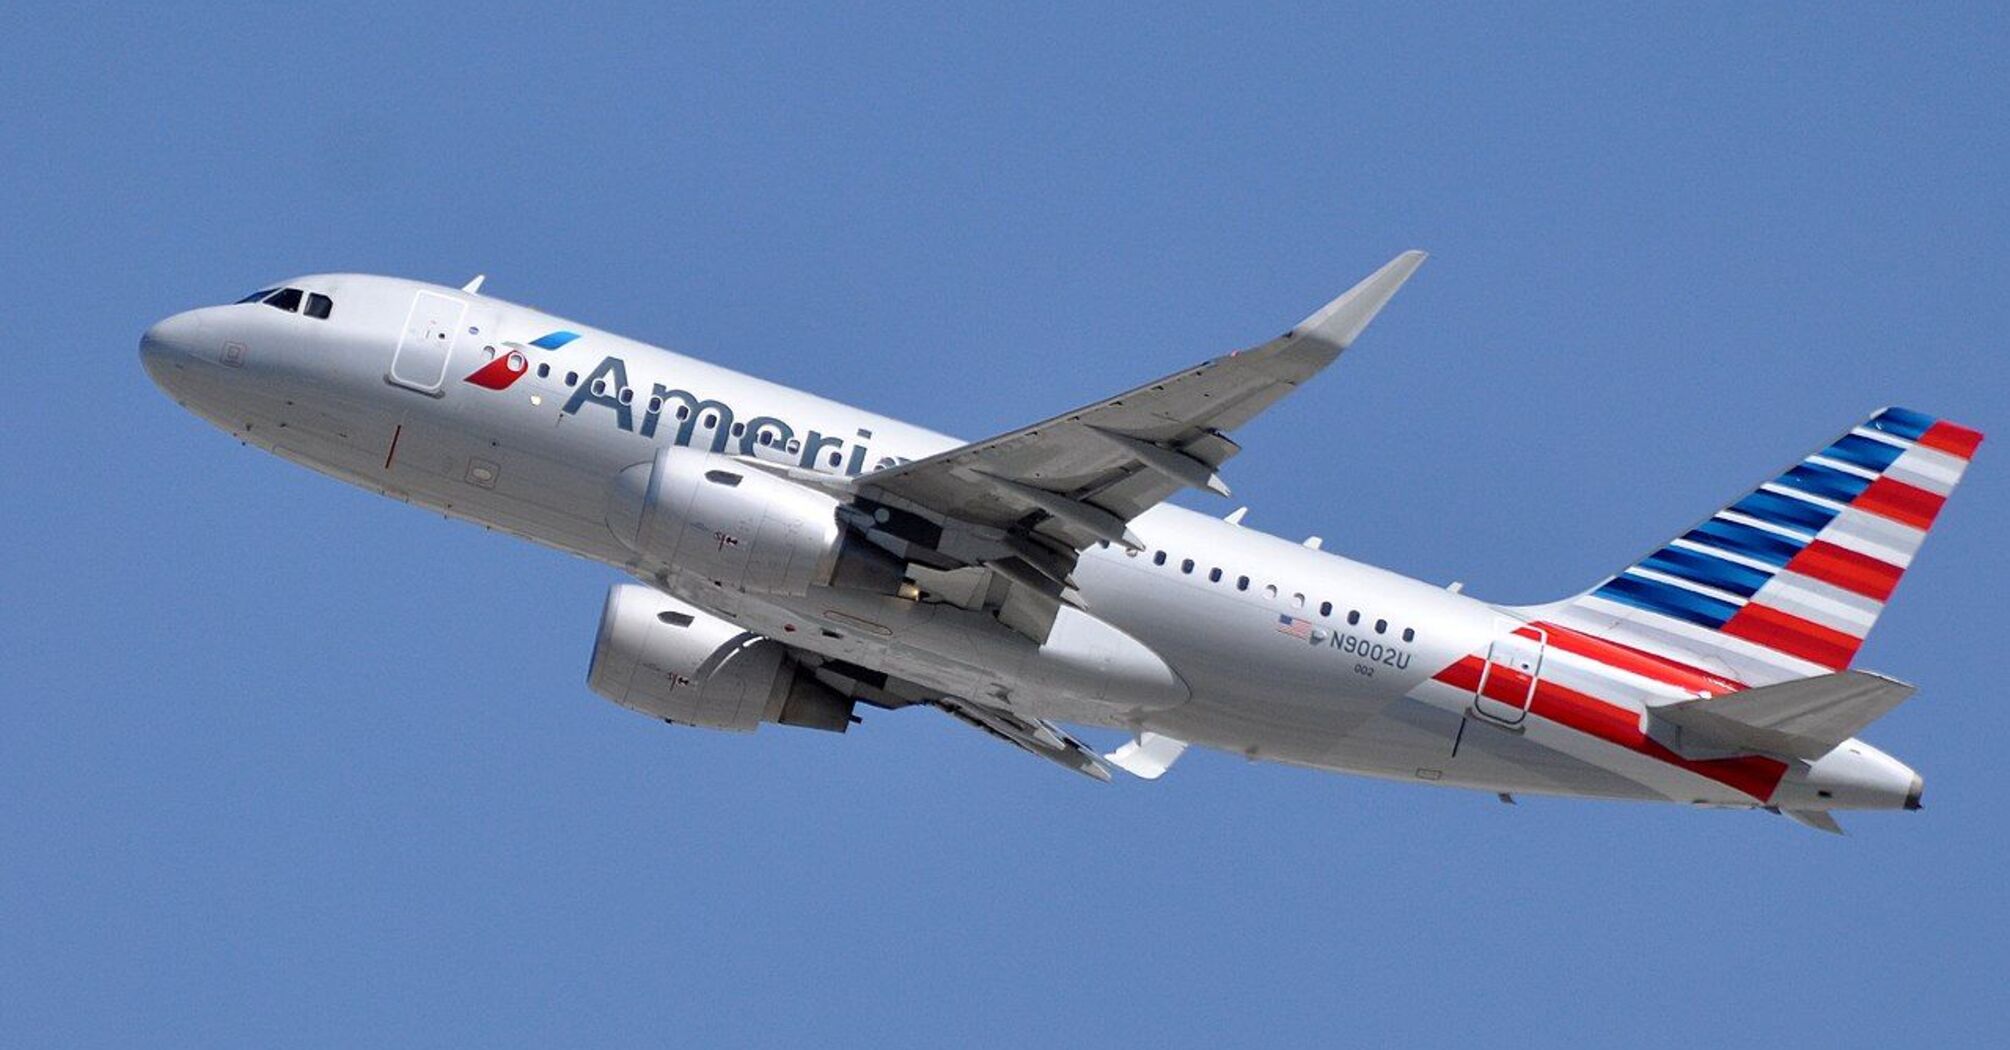 American Airlines will open its longest route with a new flight to Australia